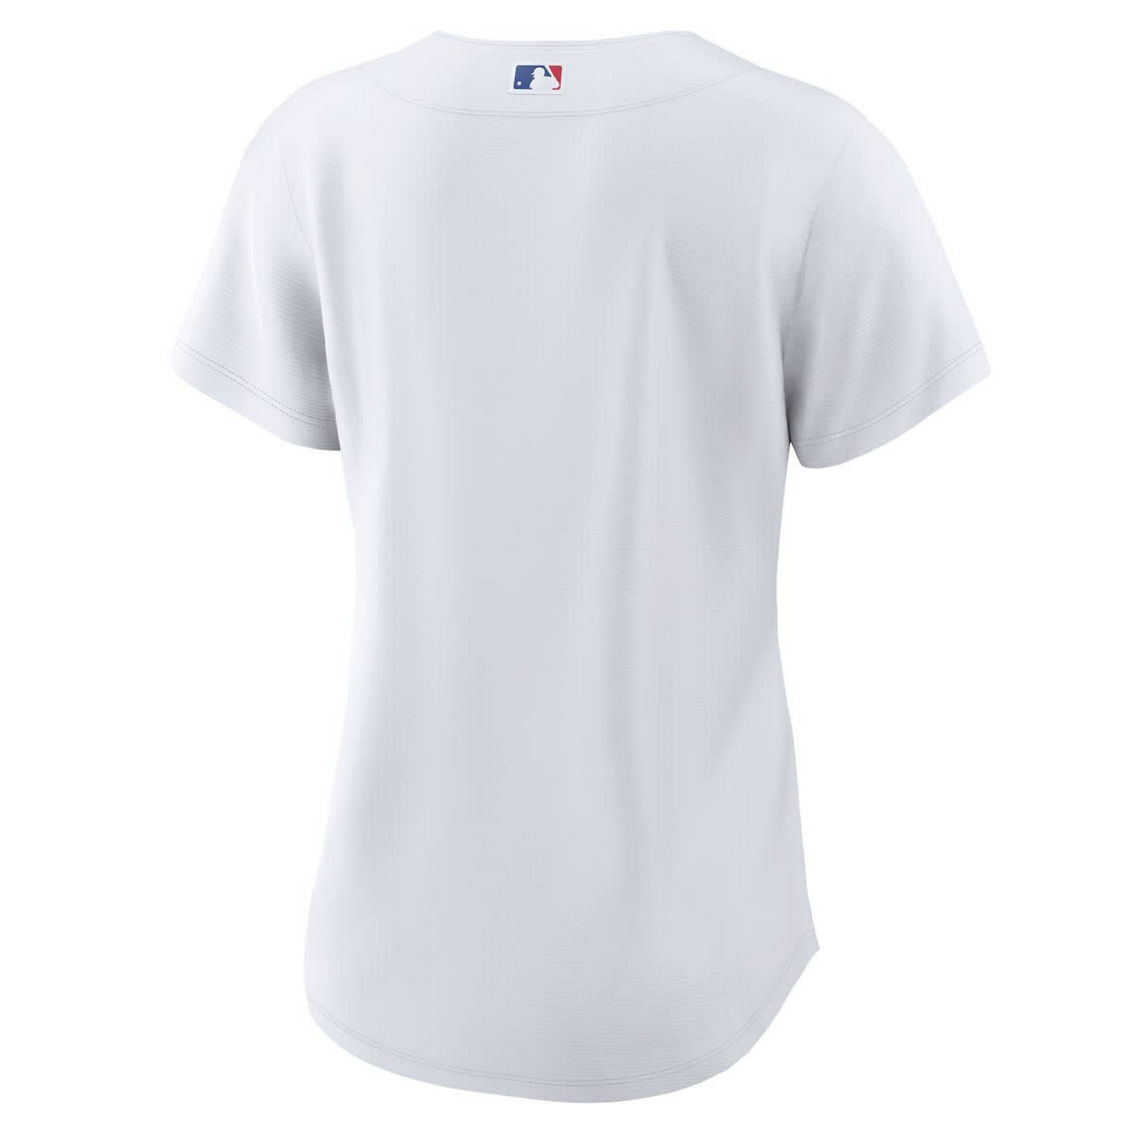 Nike Women's White Los Angeles Dodgers Home Replica Team Jersey - Image 4 of 4